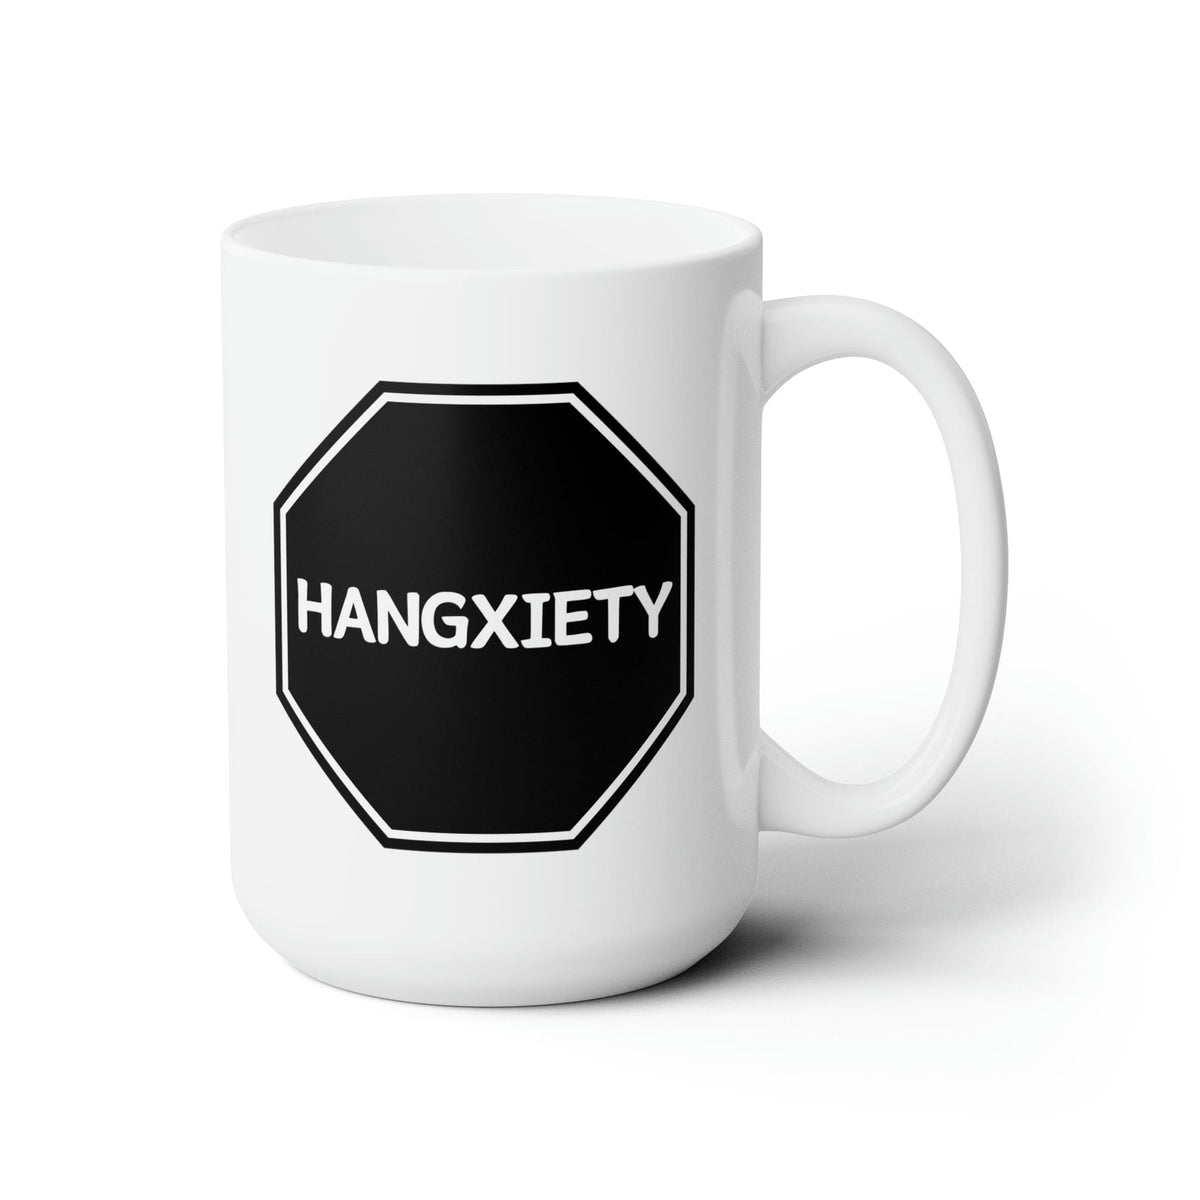 Hangxiety Ceramic Mug 15oz | Hungover Anxiety | Funny Gift for Friends Mug TheFringeCultureCollective